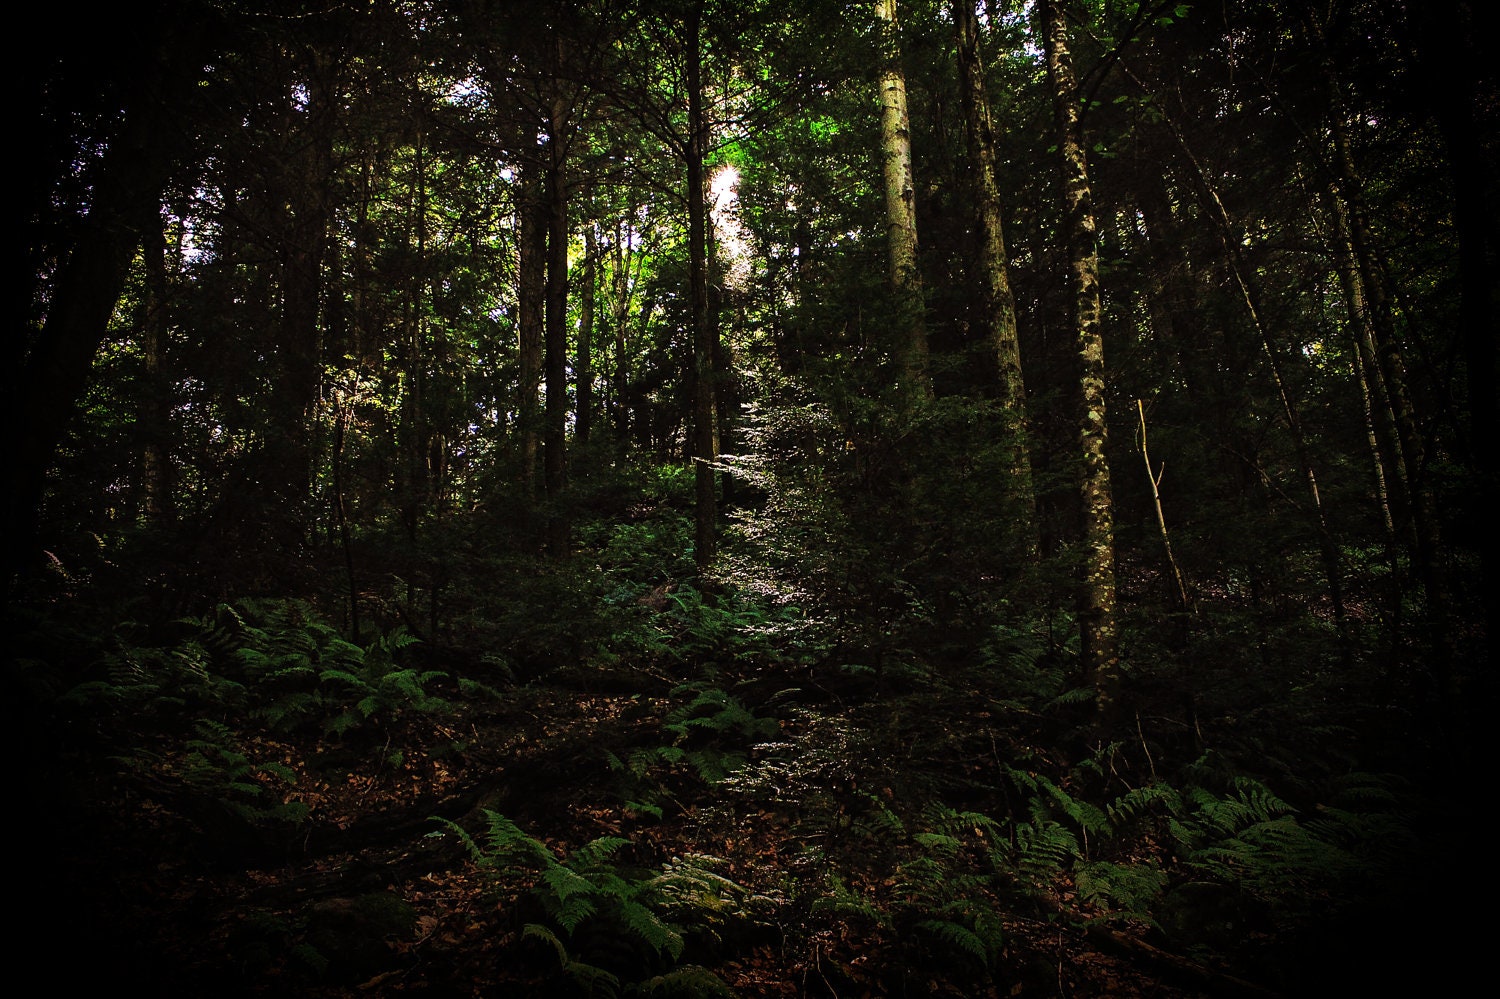 Untouchable Forest - 8x10 photo print - more sizes available - AlexisLawer